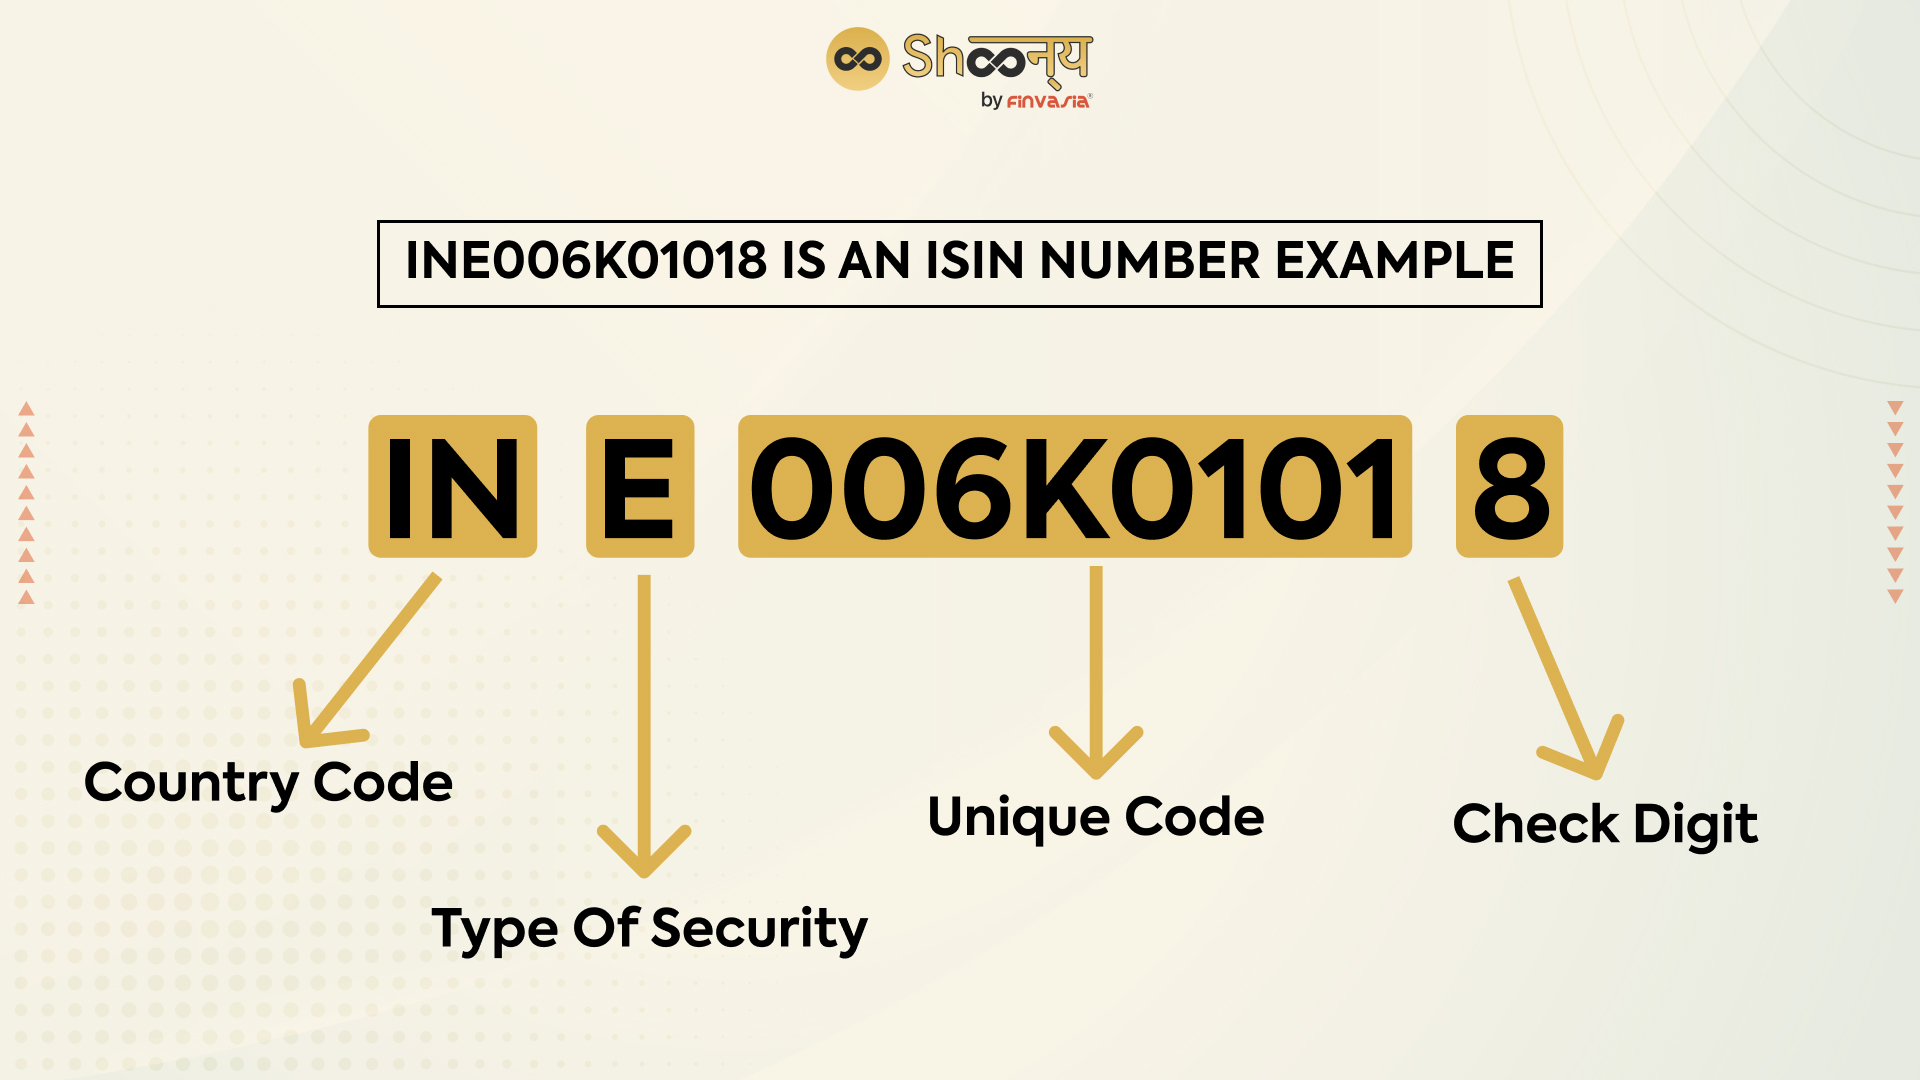 ISIN number example